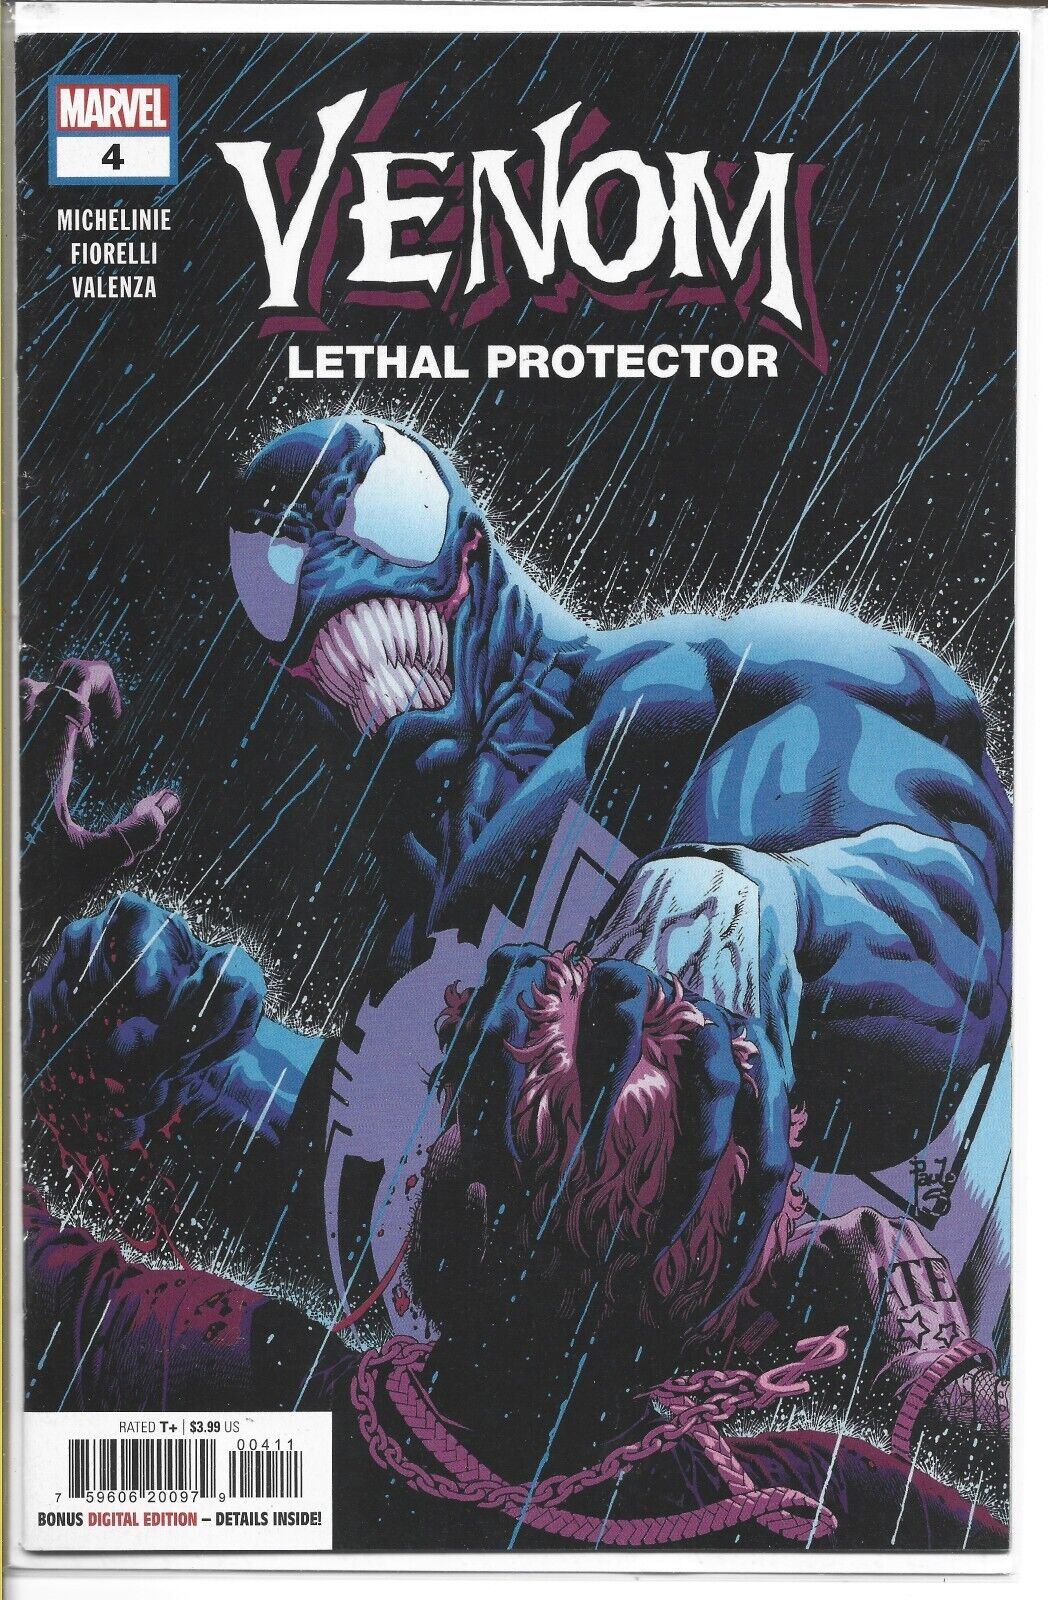 VENOM LETHAL PROTECTOR #4 MARVEL COMICS 2022 BAGGED AND BOARDED